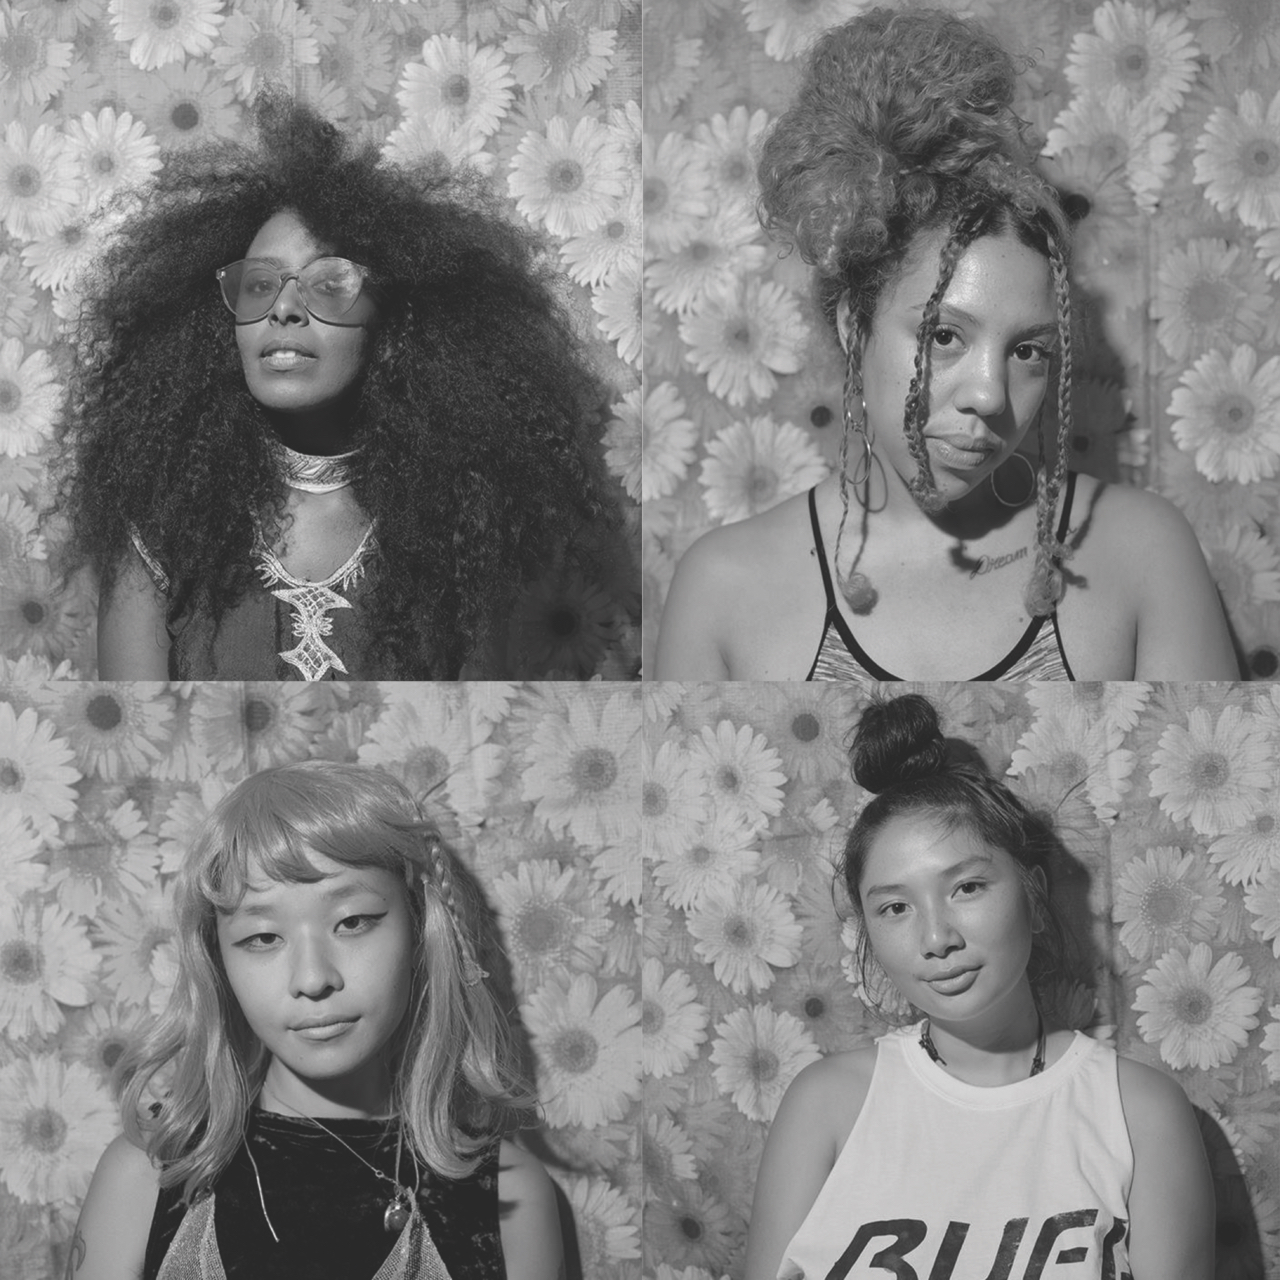 Pictured from top left: Tsige Taffese, a Black woman with long curly hair, wearing sunglasses. Pictured top right: Jazmin Jones, a light-skinned Black femme with fringe braided hair and curly hair in a ponytail. Bottom left is pictured Suhyun Choi, a Korean non-binary person with a 50's style blond hair. Bottom right is pictured Katherine Tom, a tanned Korean person with dark hair up in a bun.